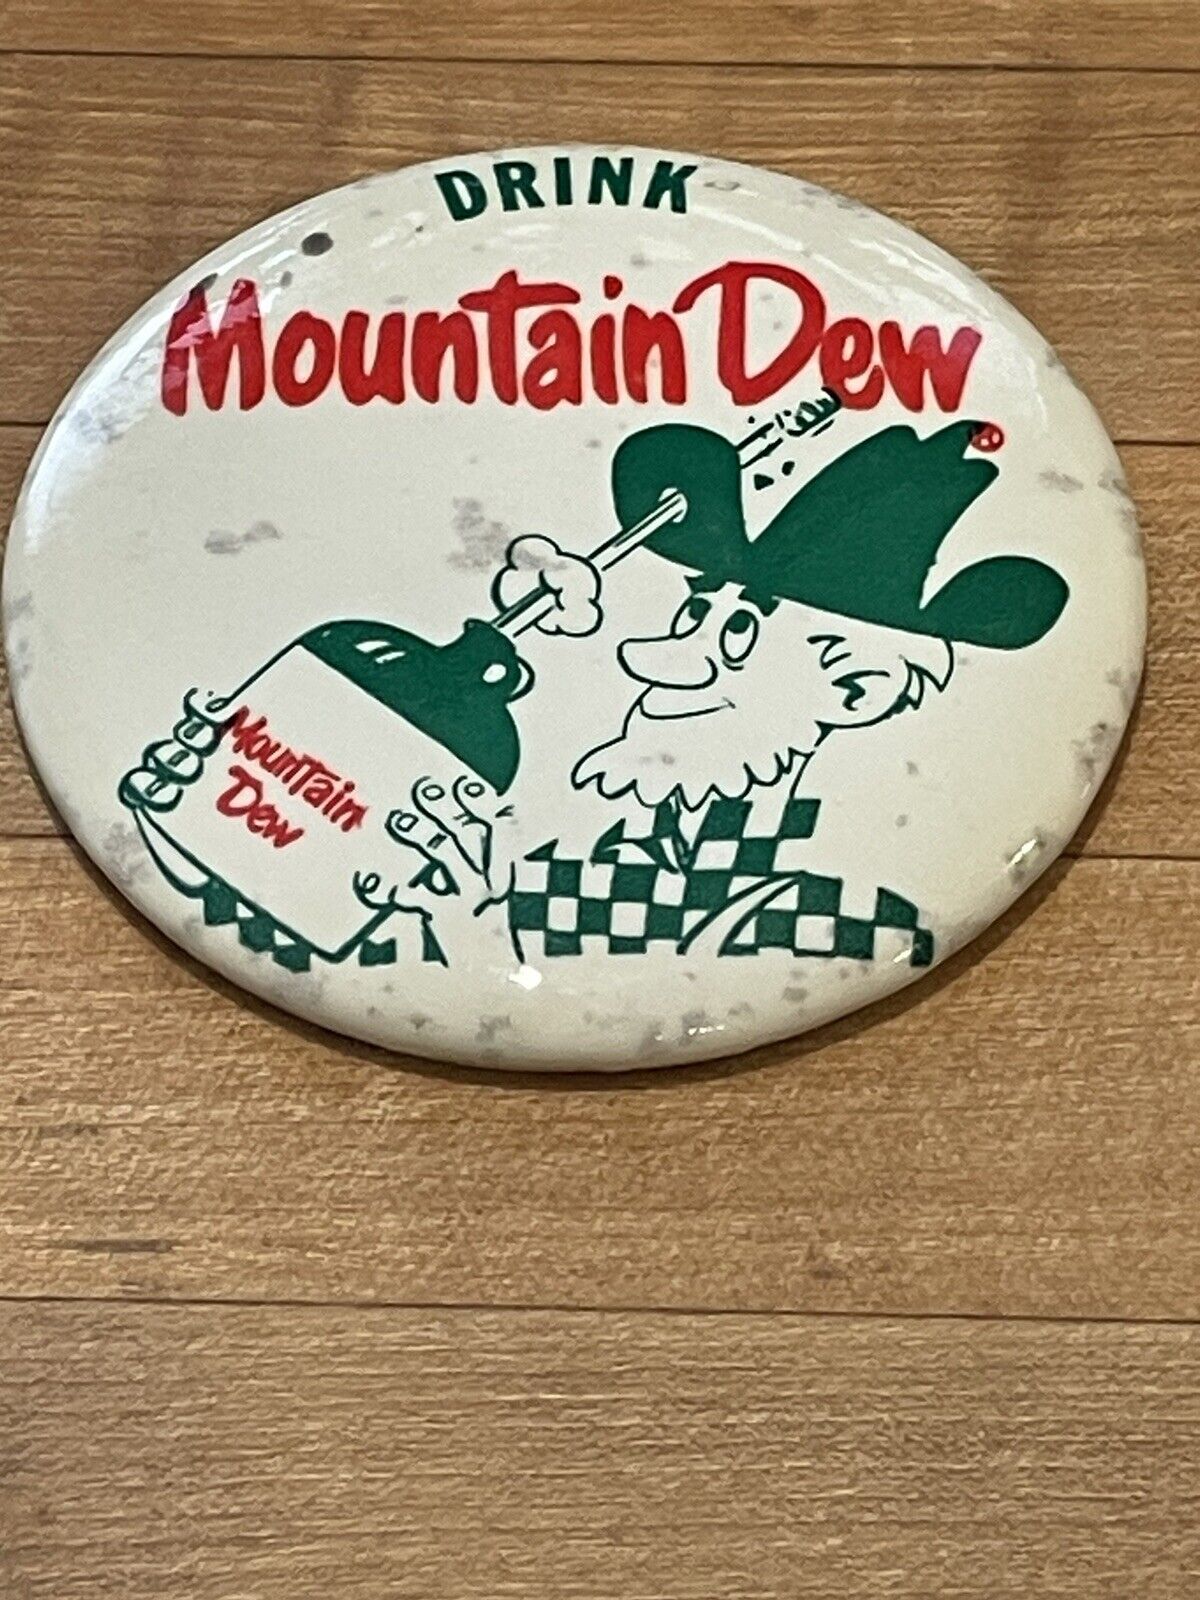 1960s Vintage Mountain Dew Pin Willy Mountain Dew Promotional Pin